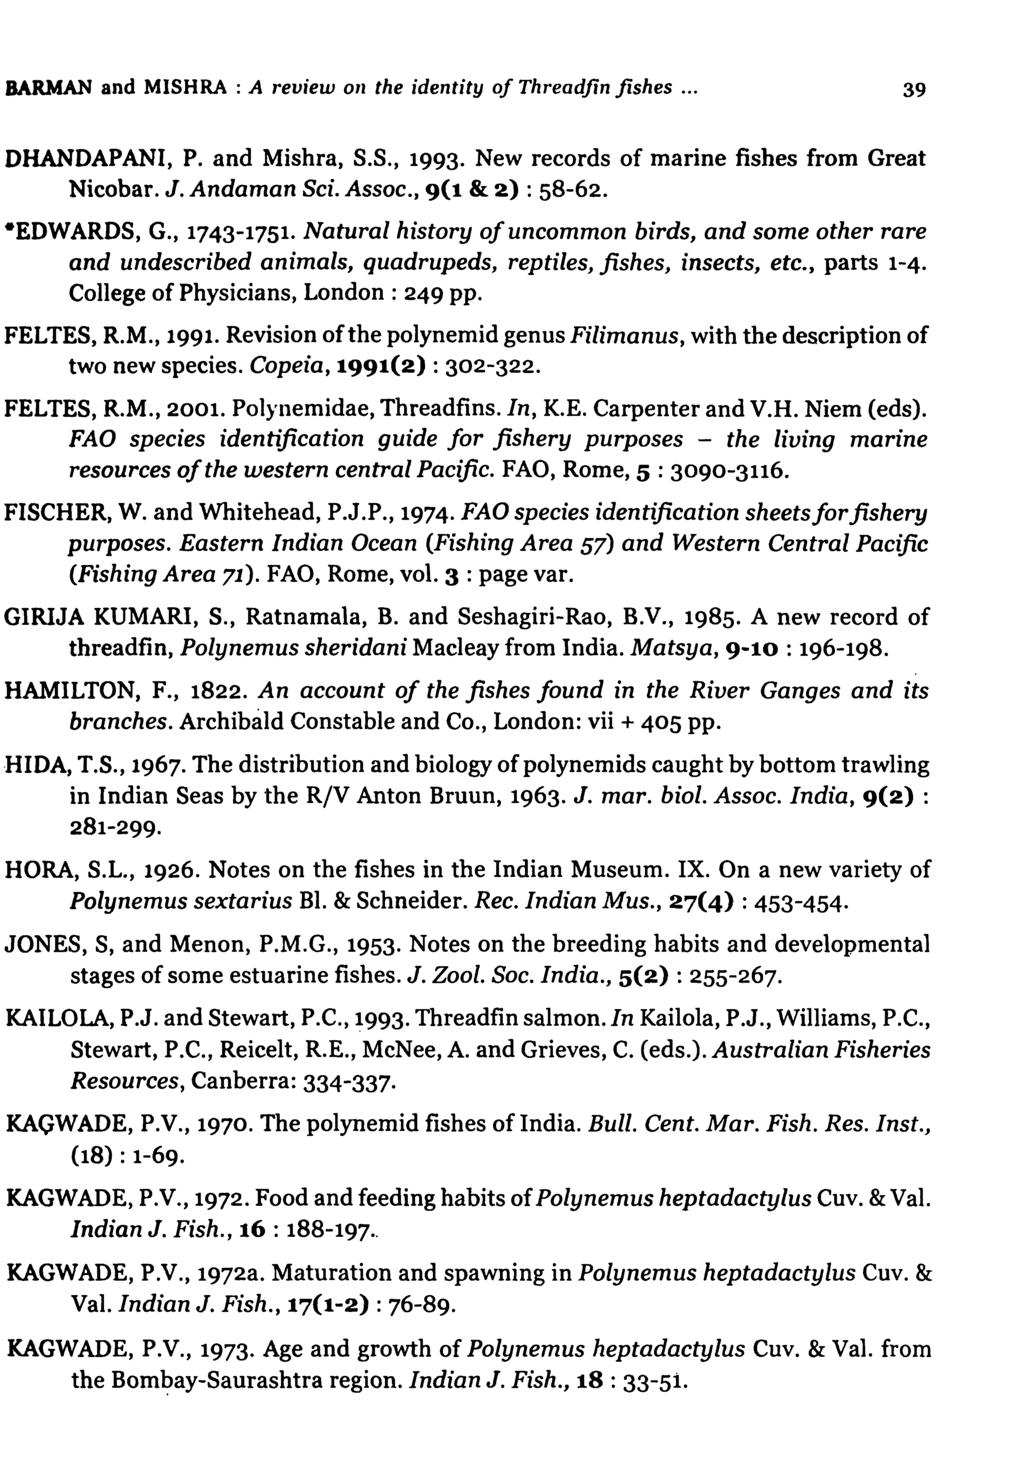 BARMAN and MISHRA : A review on the identity of Threadfin fishes... 39 DHANDAPANI, P. and Mishra, S.S., 1993. New records of marine fishes from Great Nicobar. J. Andaman Sci. Assoc., 9(1 & 2) : 58-62.